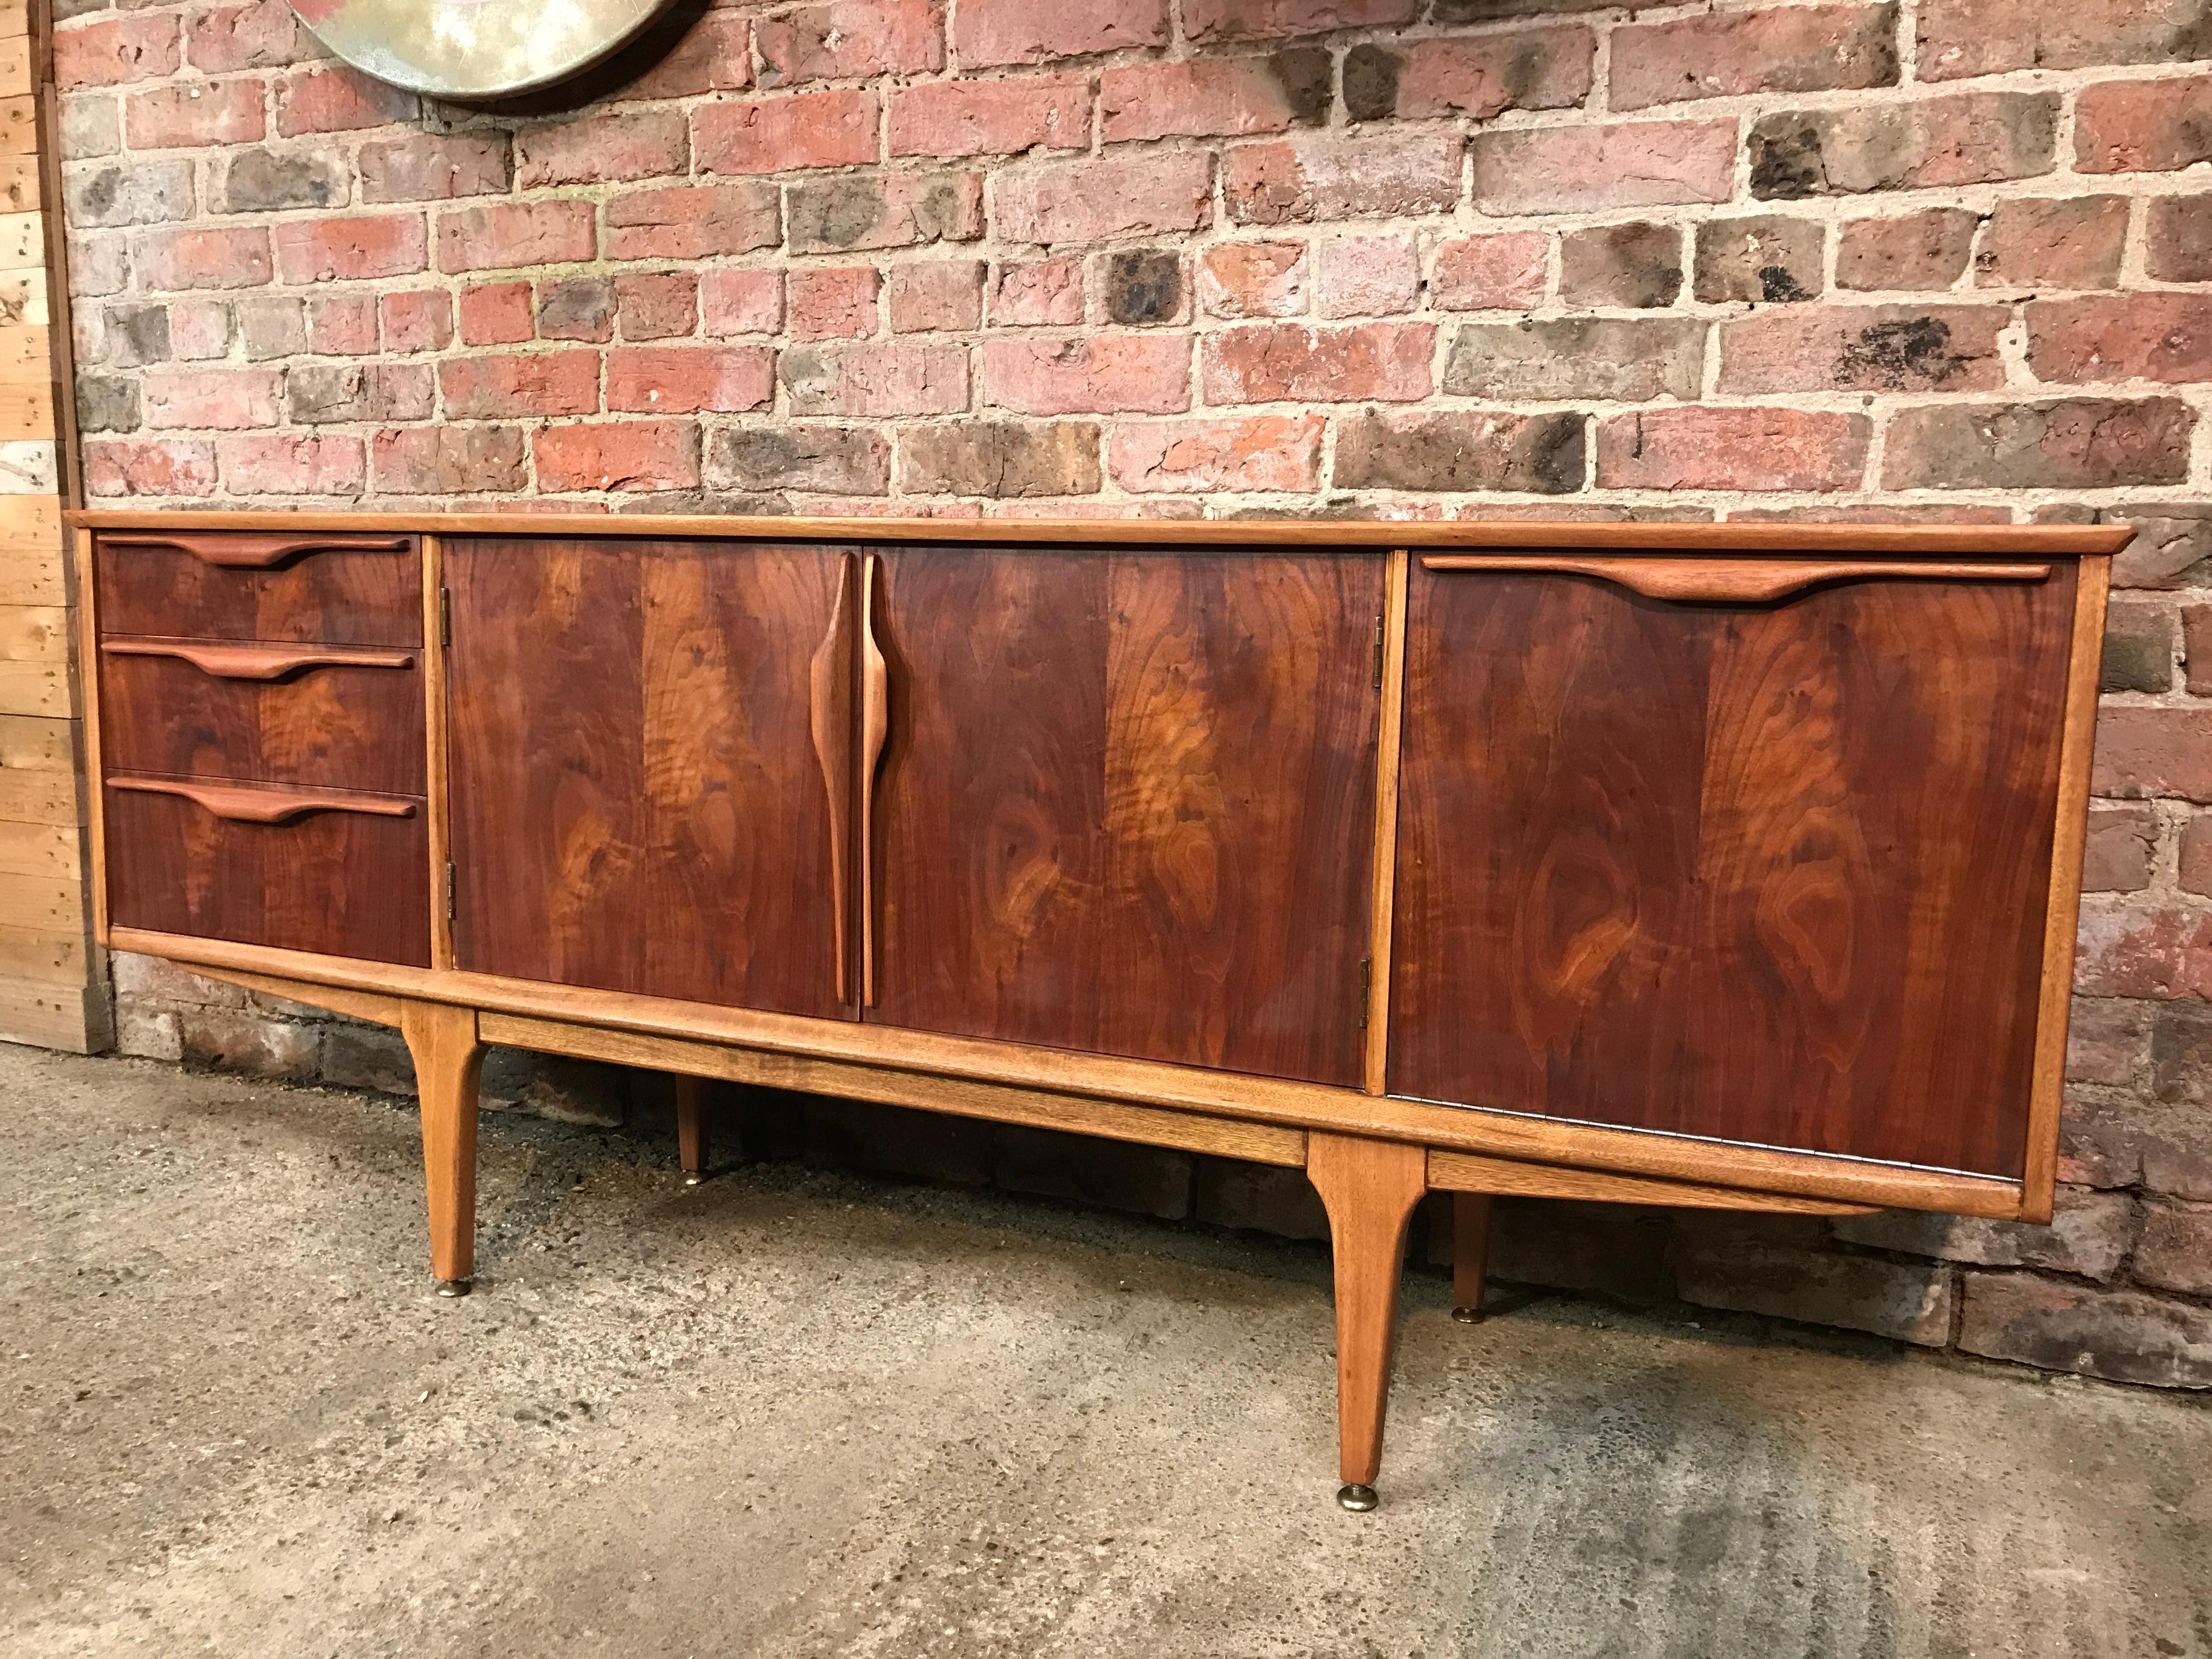 Sought after Vintage 1960 very rare walnut Jentique retro sideboard / credenza, it has three drawers on Left and lots of cupboard space, it stands on lovely solid teak legs.

Measures: Height 74cm, depth 45cm, width 183cm.